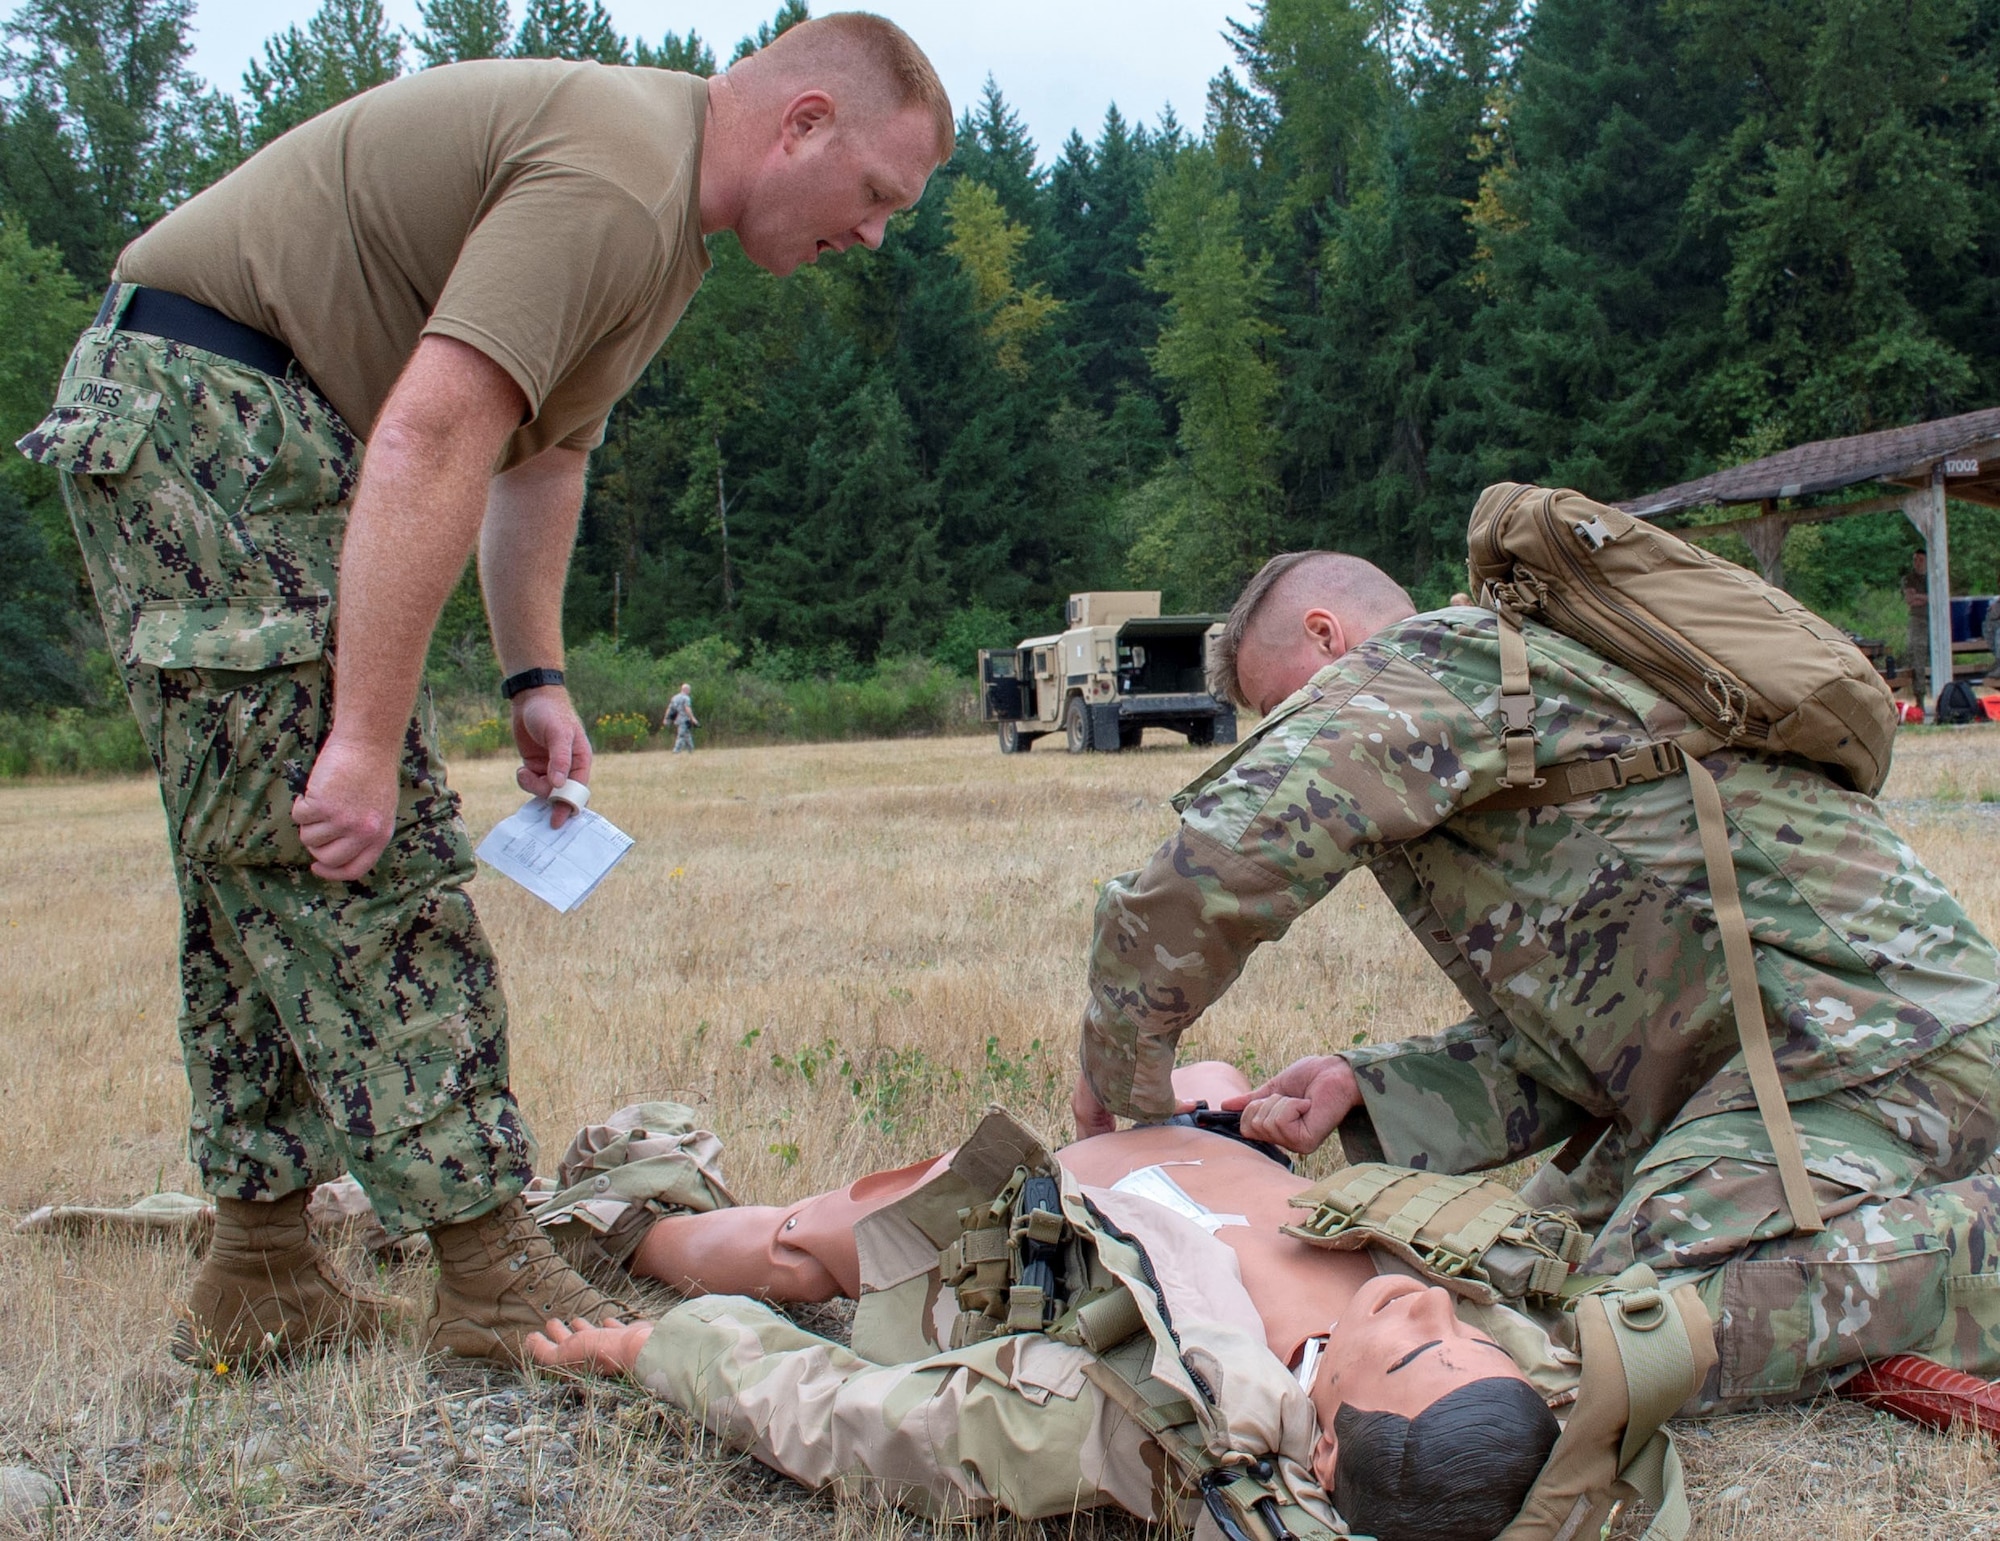 Hospital Corpsman 1st Class Brian Jones, an instructor assigned to Navy Reserve Navy Medicine Education and Training Command and selected for the rank of chief, evaluates Air Force Staff Sgt. Connor Bitterman tending to a simulated casualty during a tactical combat casualty care (TCCC) class for exercise Tropic Halo 2019 at Joint Base Lewis-McChord in Tacoma, Wash., Aug. 7, 2019. Tropic Halo is designed to enhance Operational Hospital Support Unit Bremerton's medical and mission capabilities on several levels: increase TCCC and trauma nurse core course readiness rates; promote intra-service cohesion with collaborative training in a joint service environment and leverage Navy and U.S. Air Force command assets to generate better training opportunities. (U.S. Navy photo by Mass Communication Specialist 1st Class Ryan Riley)